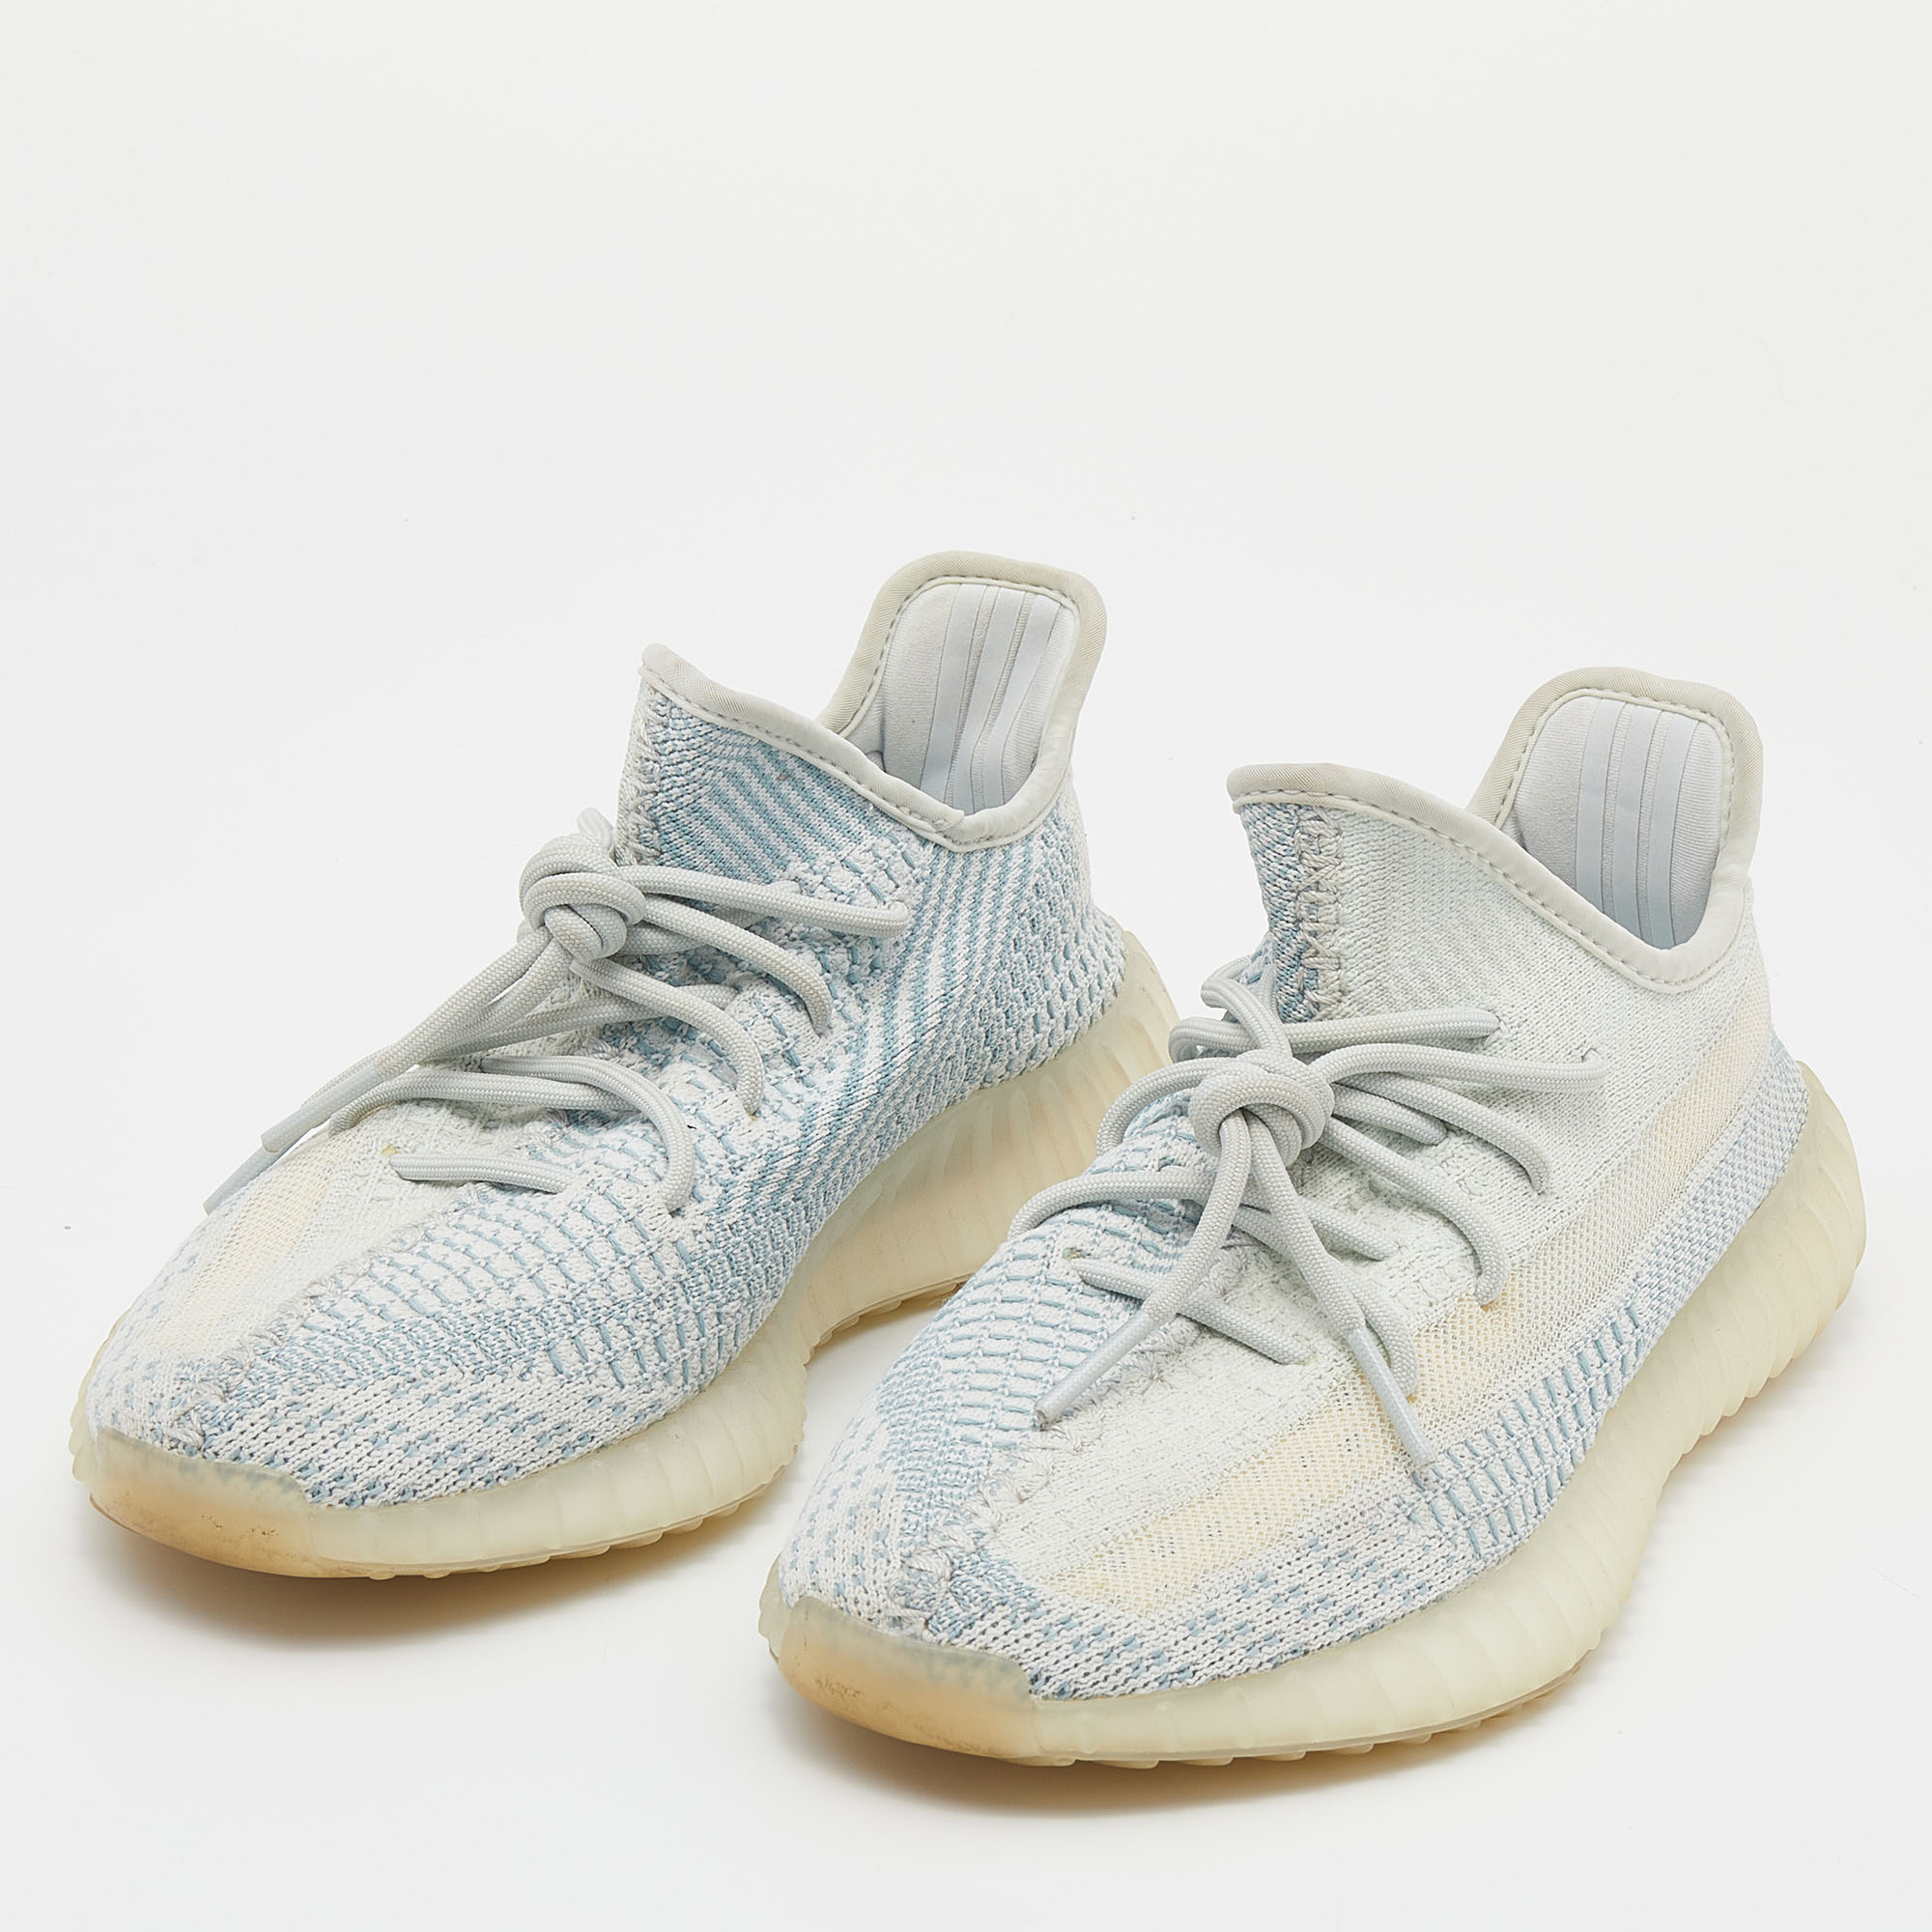 

Yeezy x adidas White/Blue Knit Fabric Boost 350 V2 Cloud White Sneakers Size 40 2/3